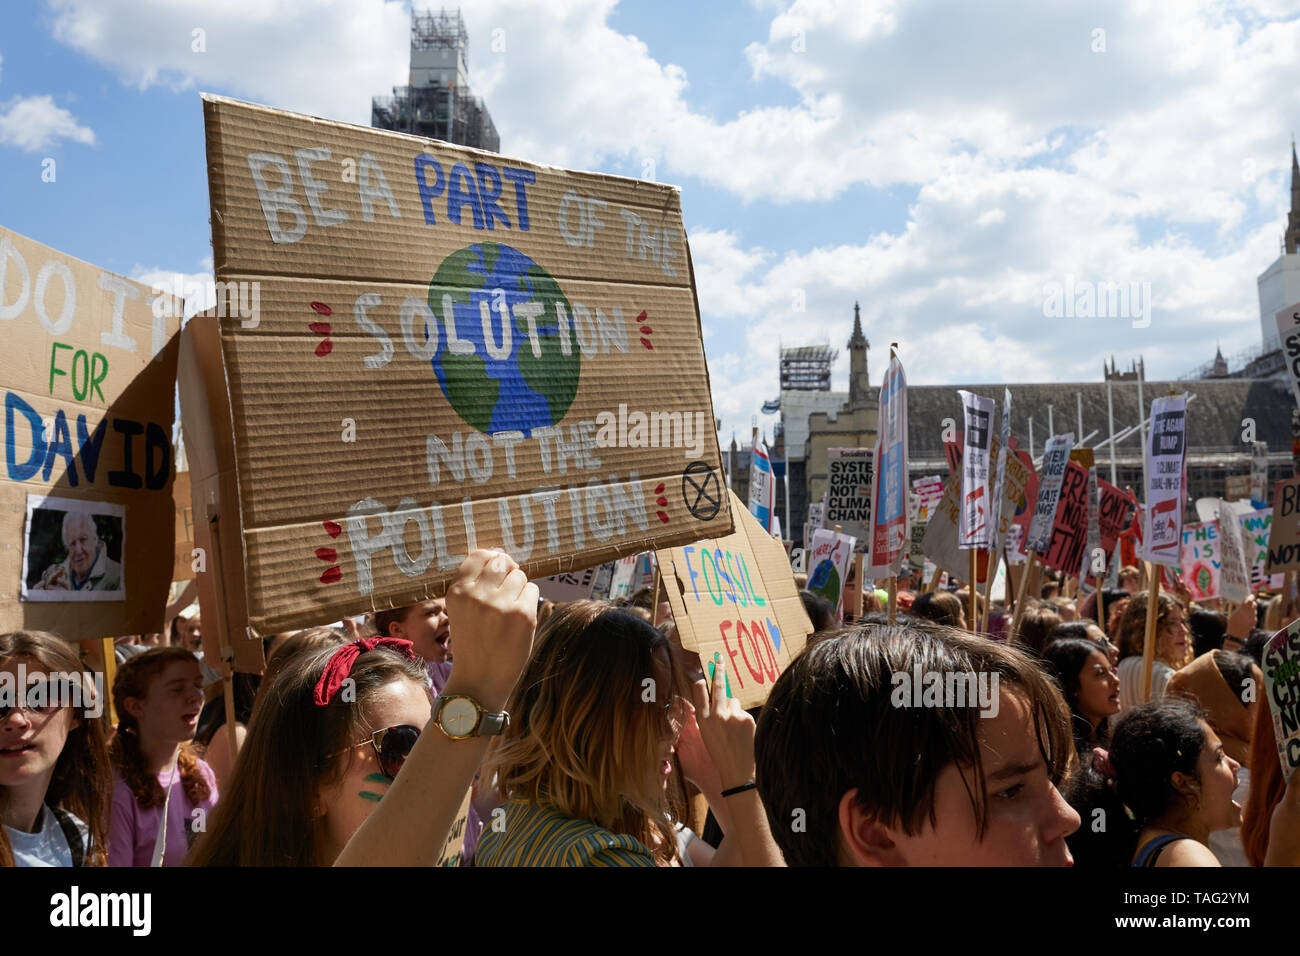 London, U.K. - 24 May, 2019: A placard held by a young demonstrator, campaigning against global warming as part of the Youth Strike 4 Climate movement. Stock Photo